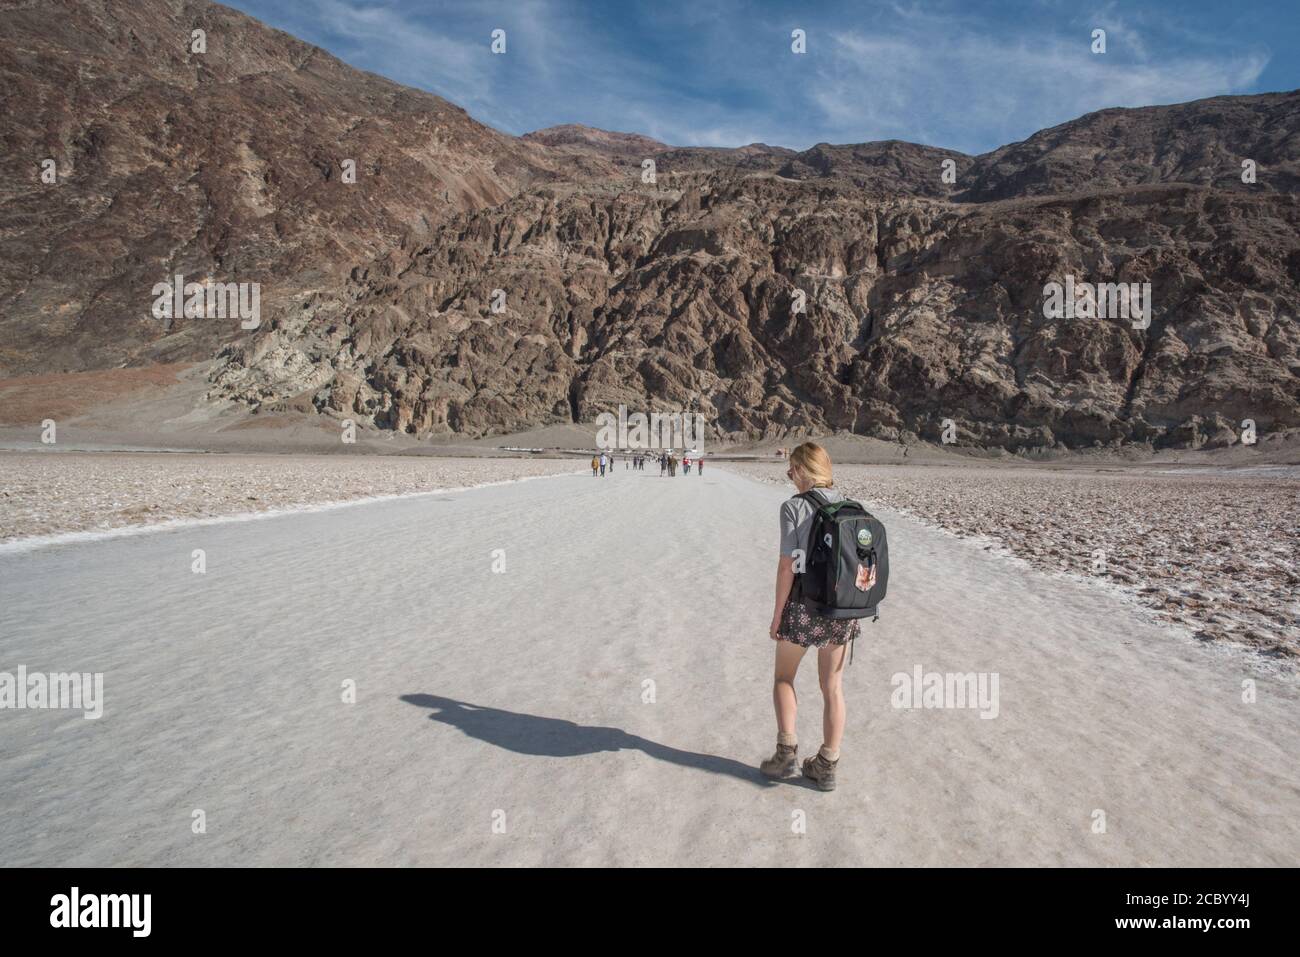 A hiker in badwater basin walking along the wide path back from the salt flat towards the mountains in Death Valley National Park. Stock Photo